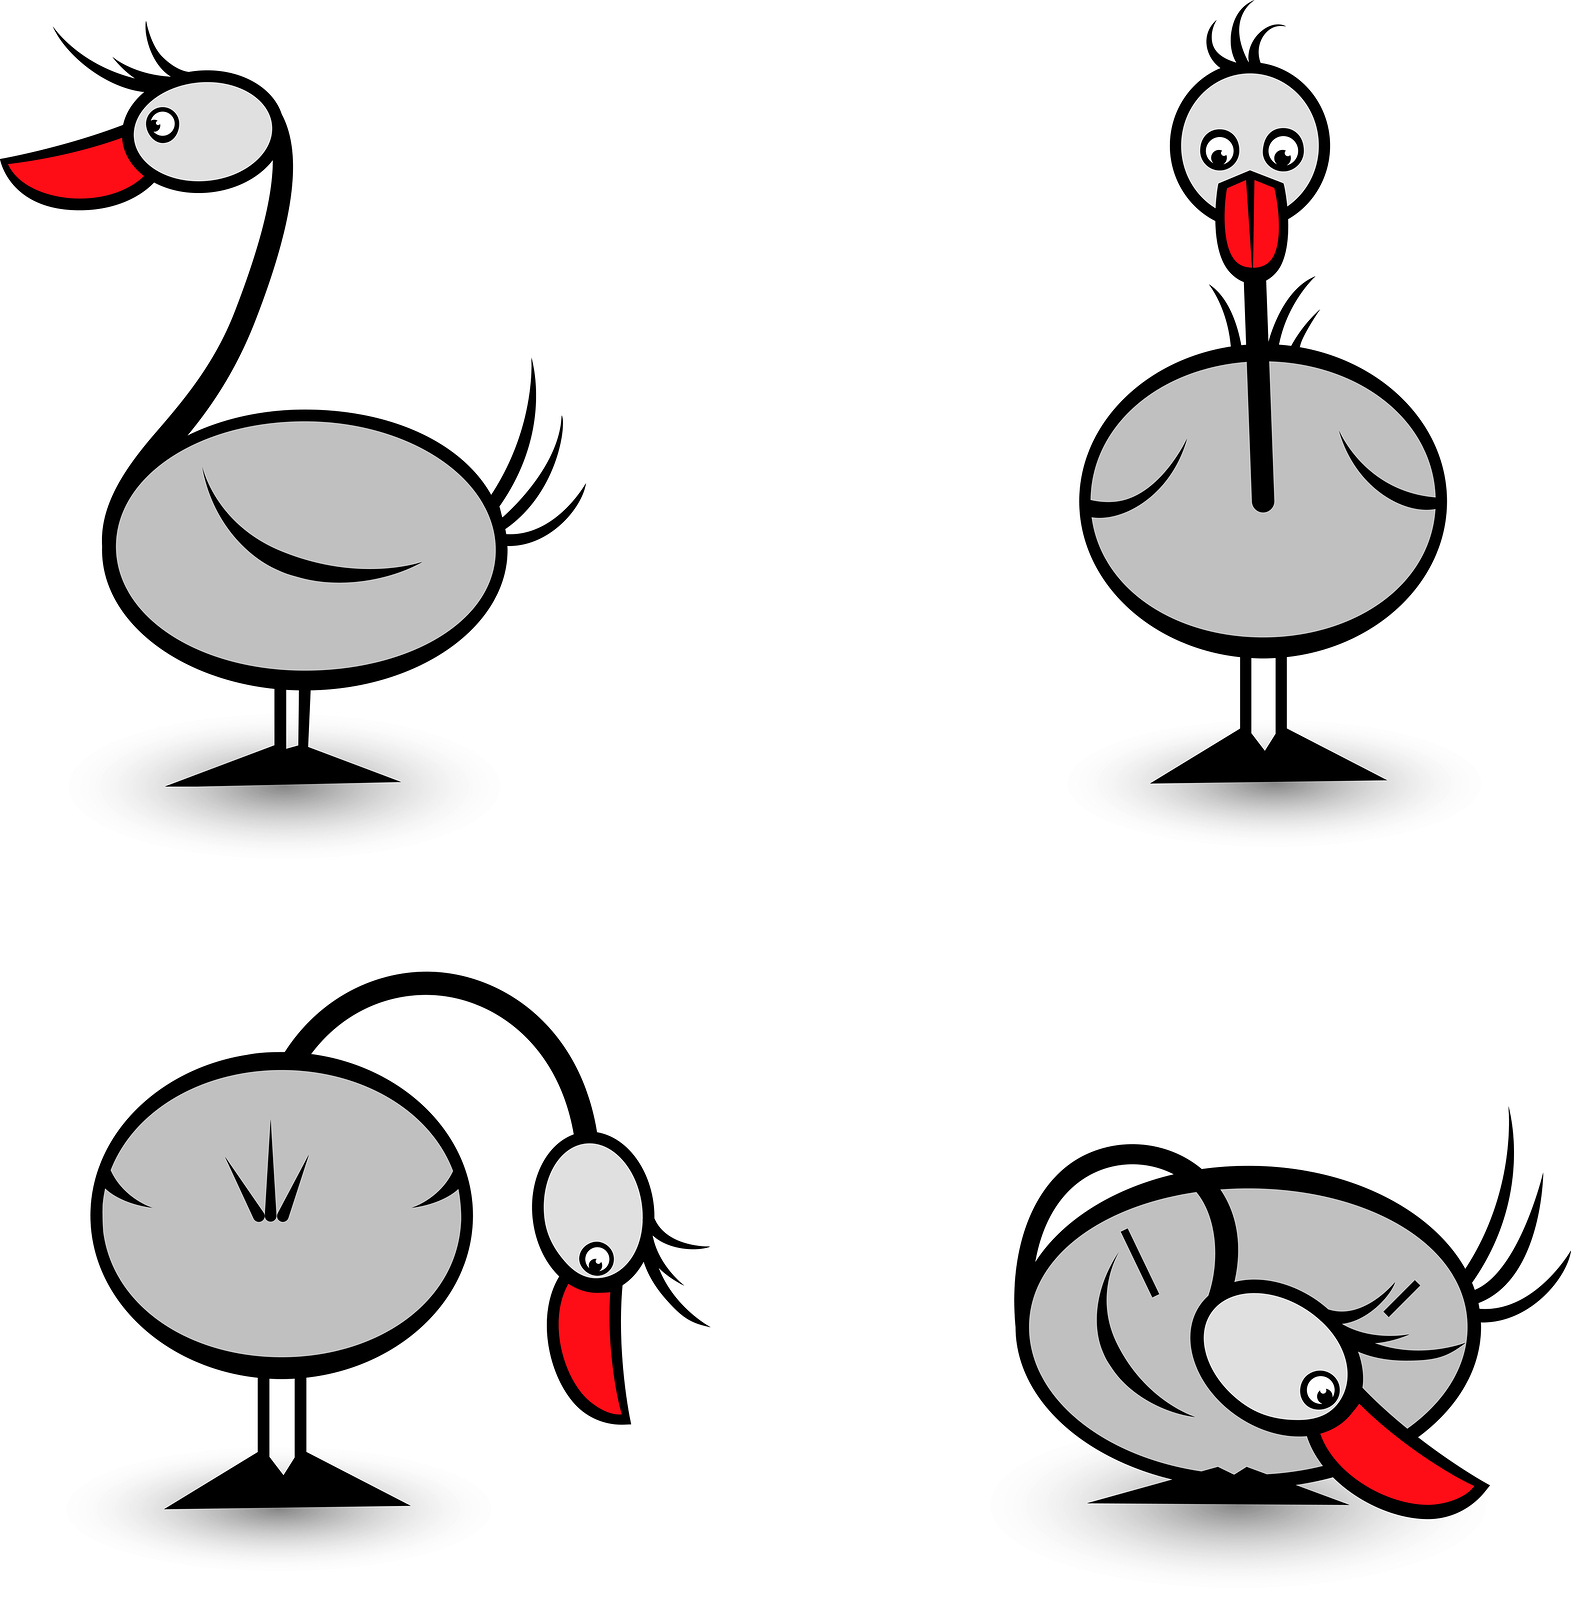 bigstock-Abstract-Four-geese-in-differe-20114783.jpg